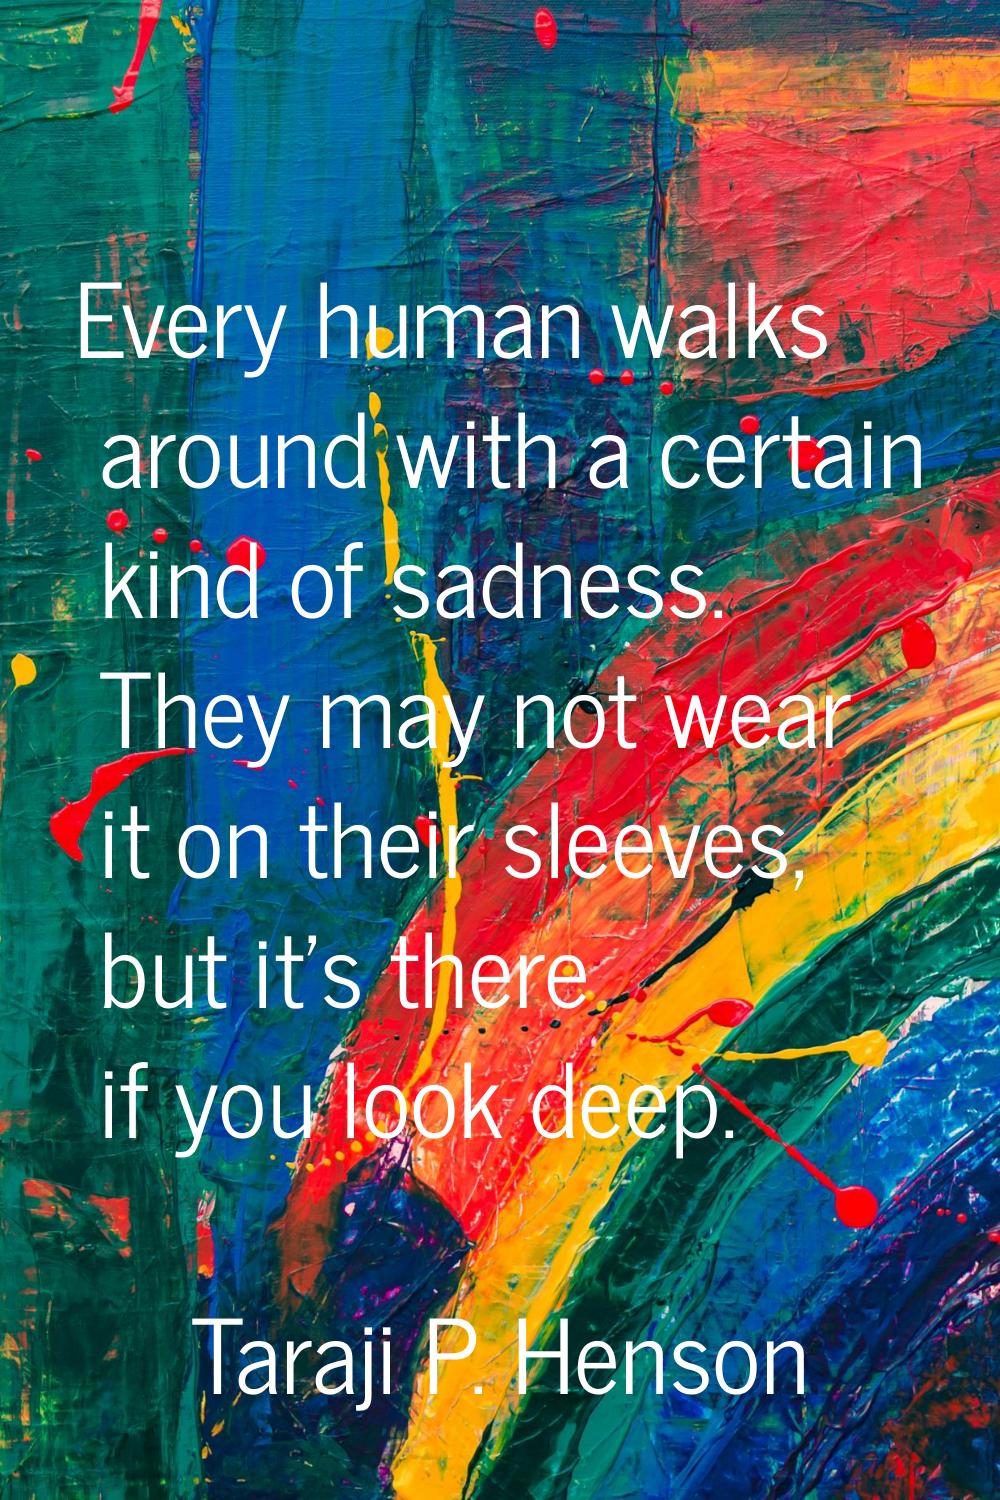 Every human walks around with a certain kind of sadness. They may not wear it on their sleeves, but